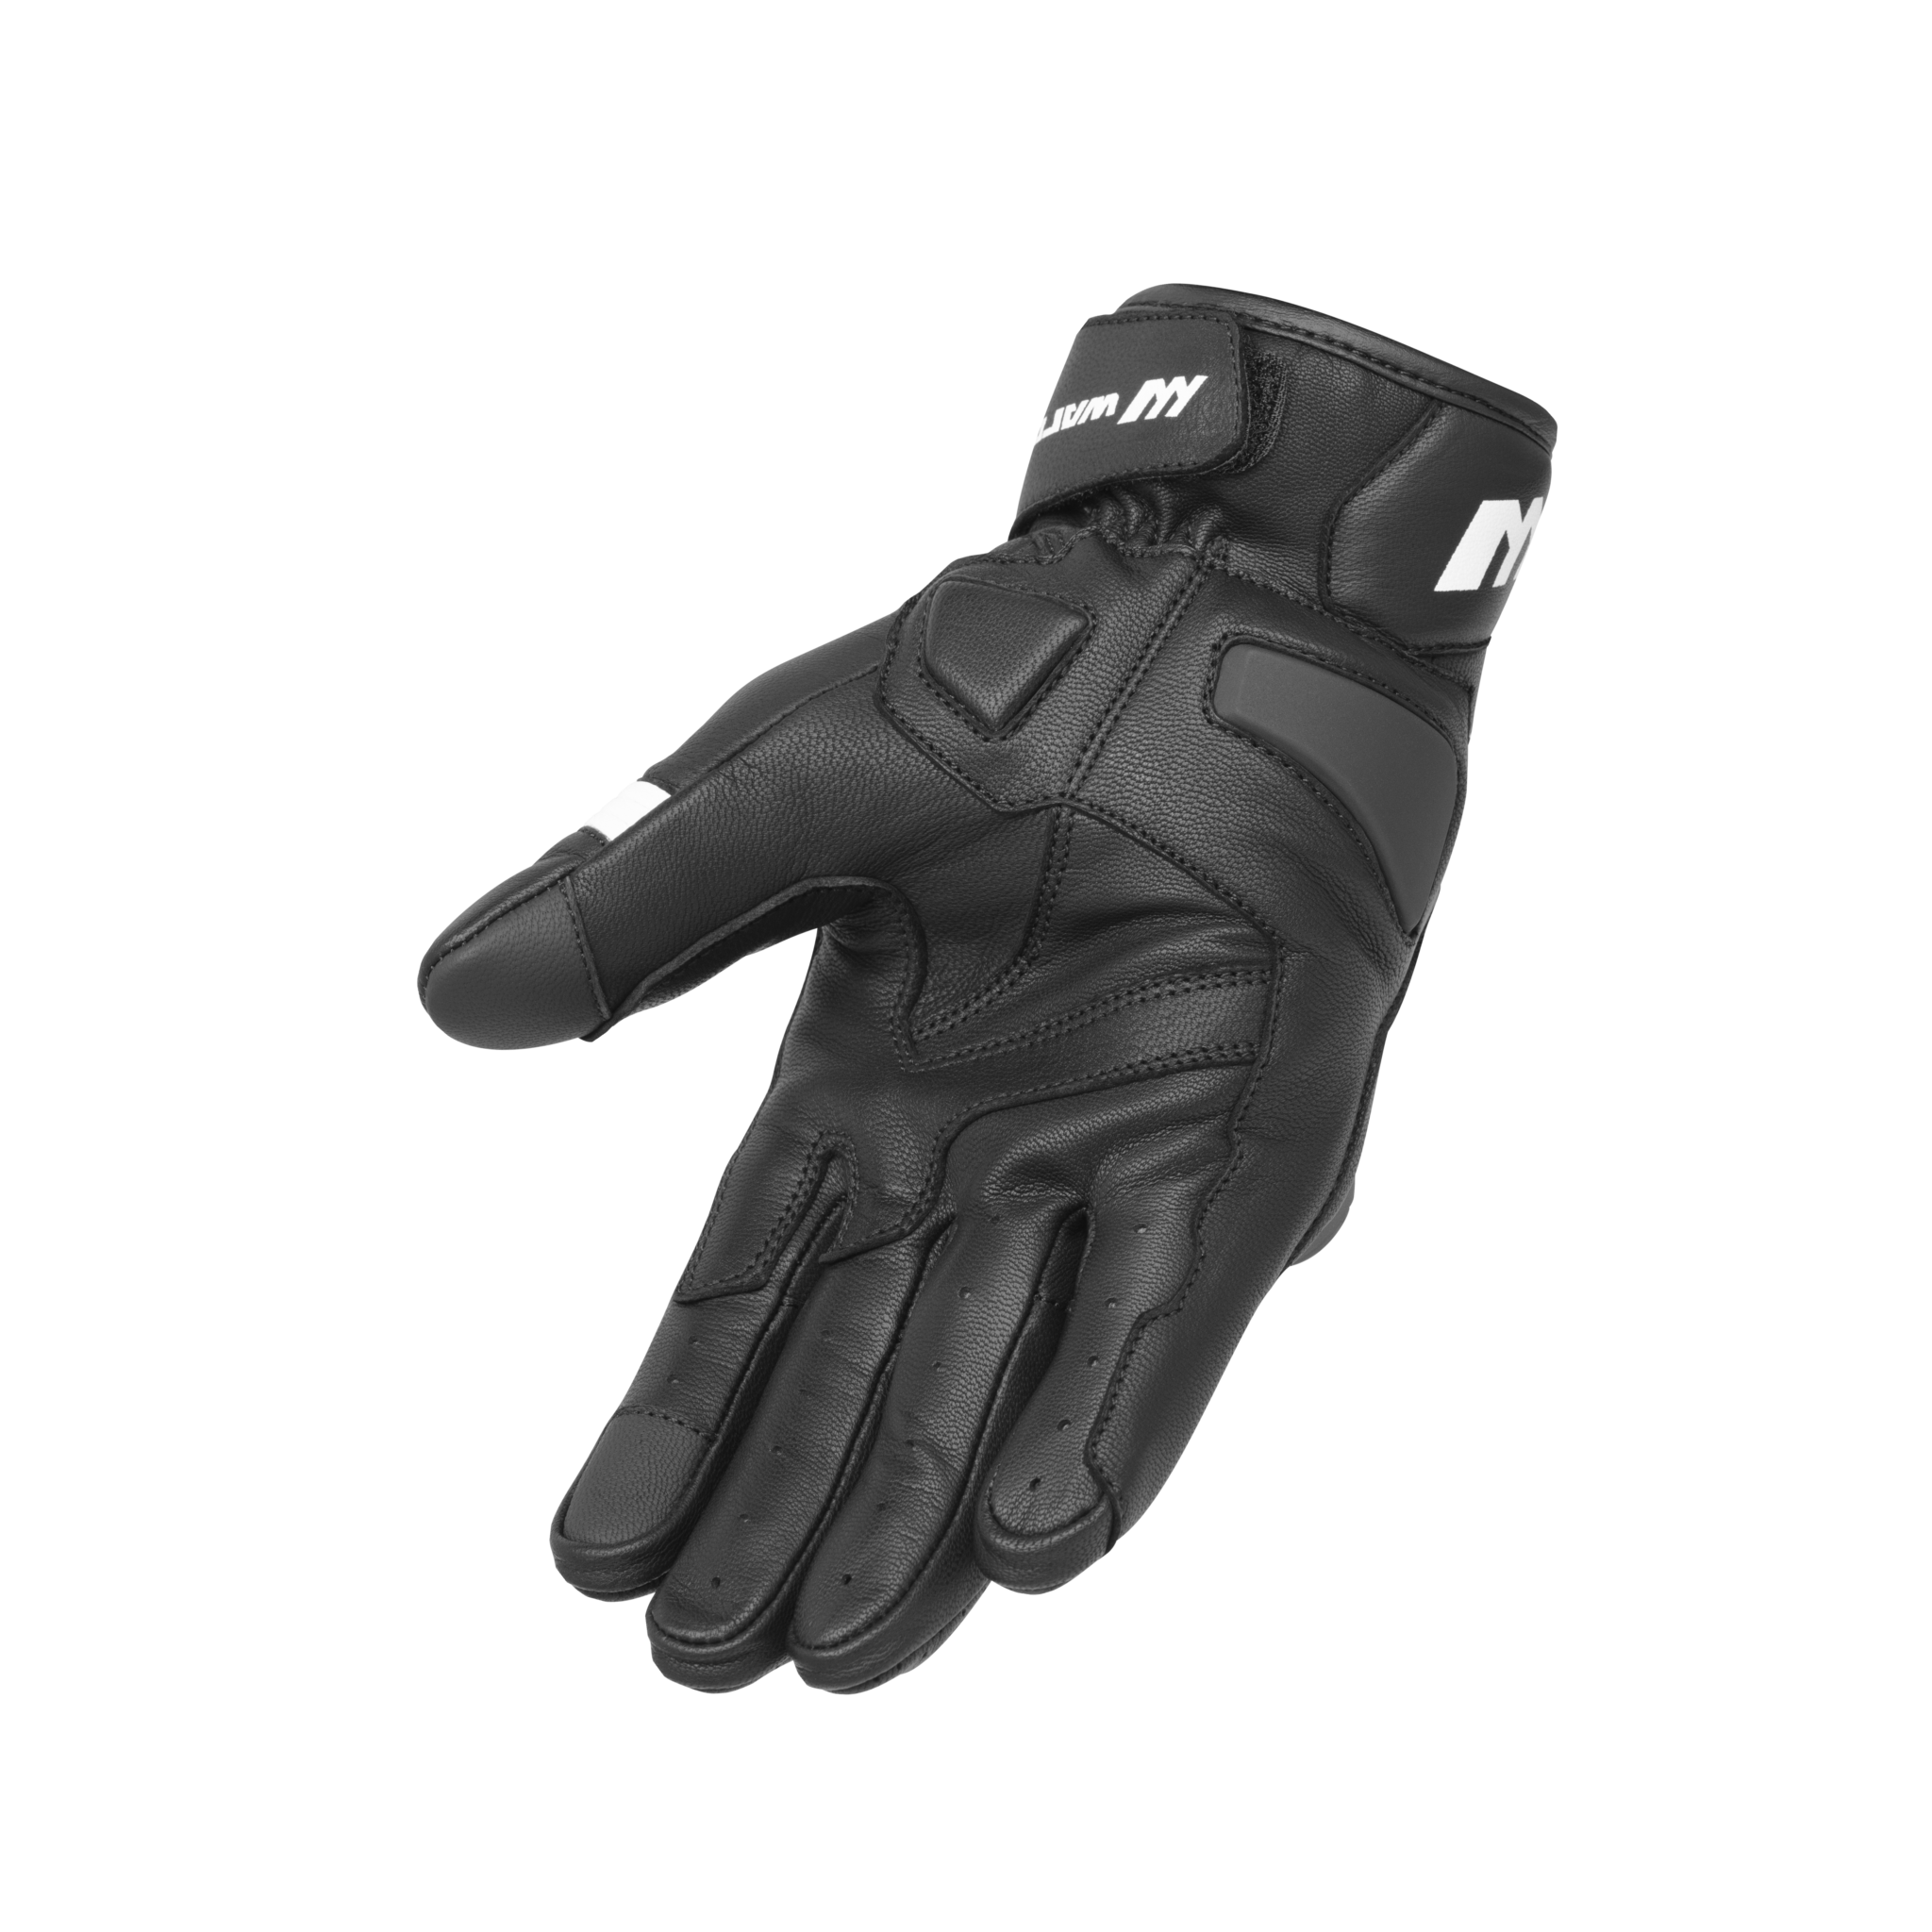 Vortex motorcycle gloves, TPU protection, breathable black-white back